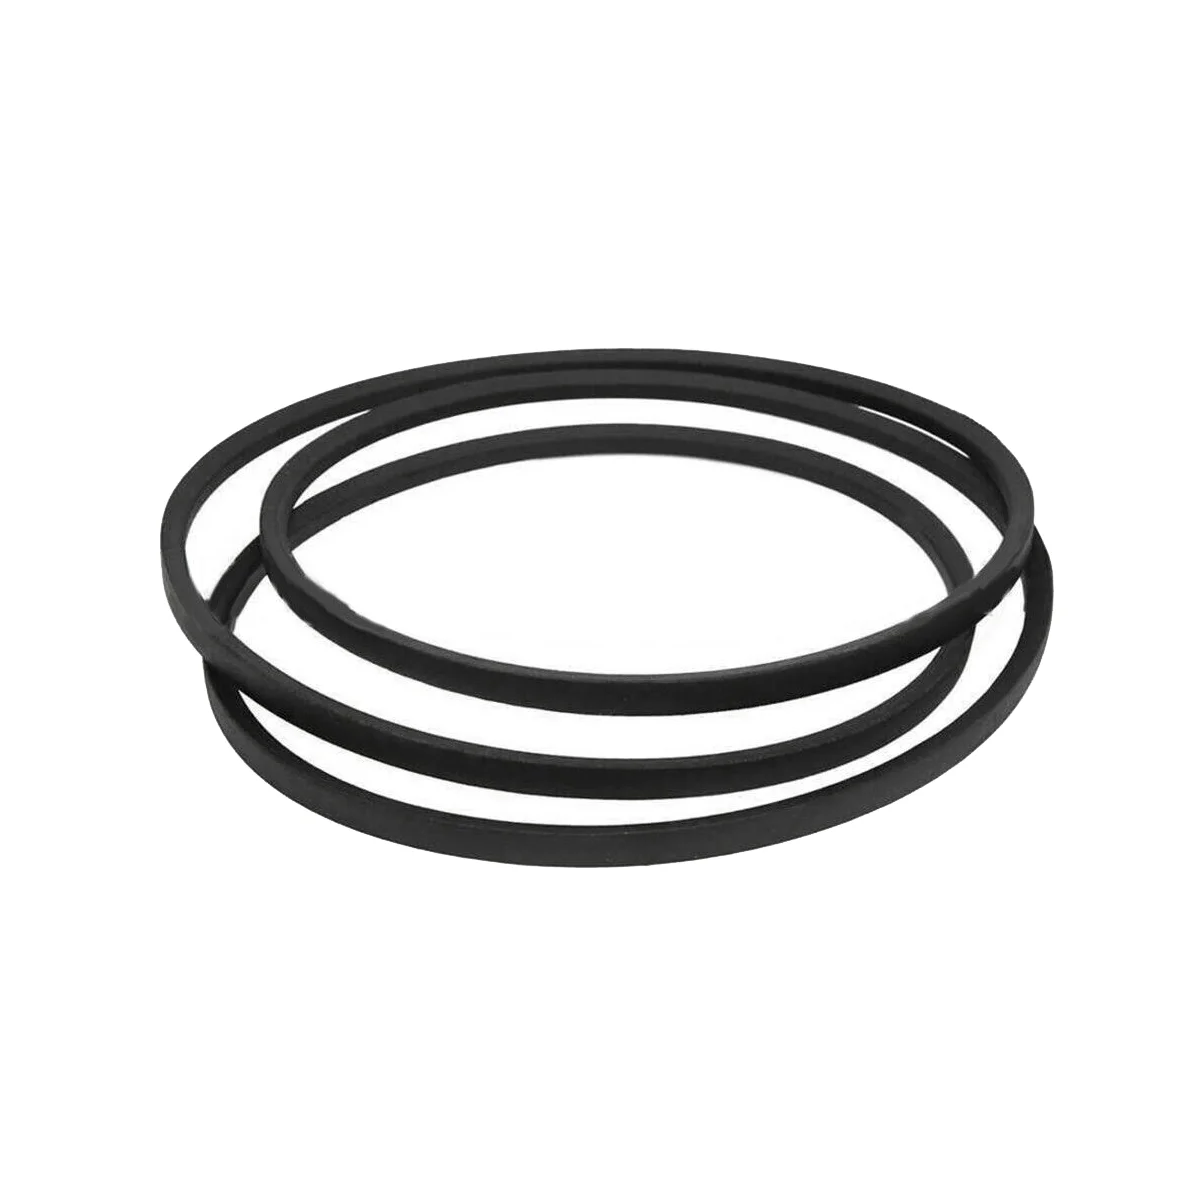 

429636 197253 Replacement Mower Drive Belt Fits for Craftsman Husqvarna Ariens Poulan